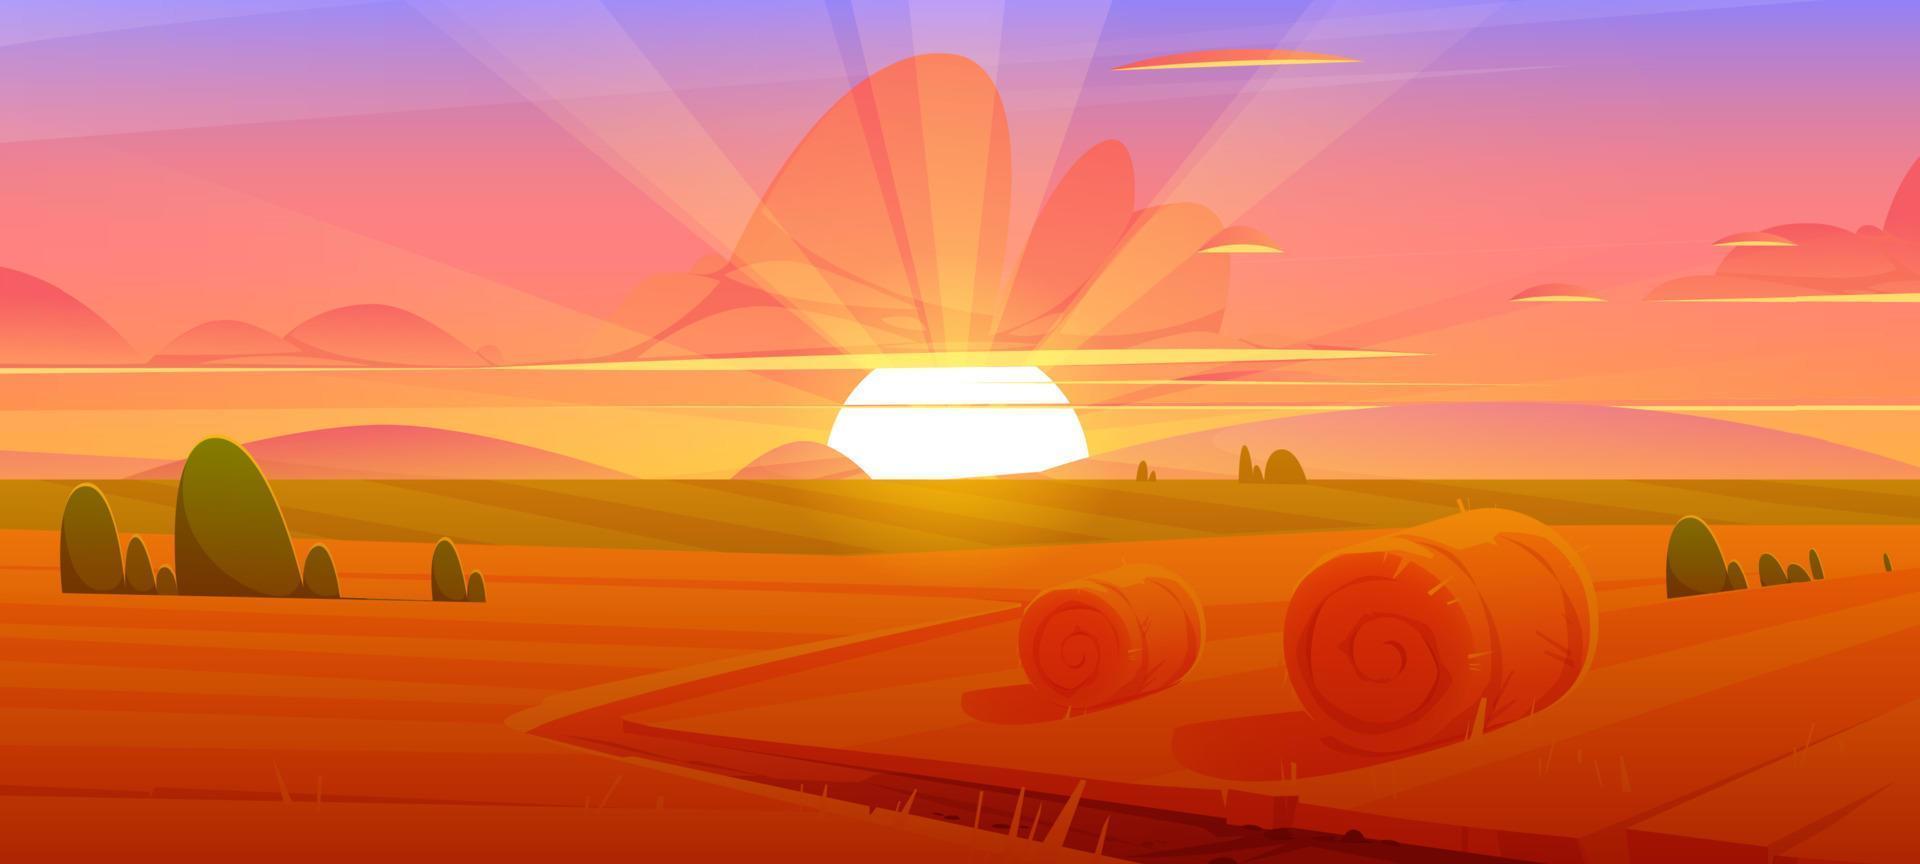 Rural landscape with hay bales on field at sunset vector